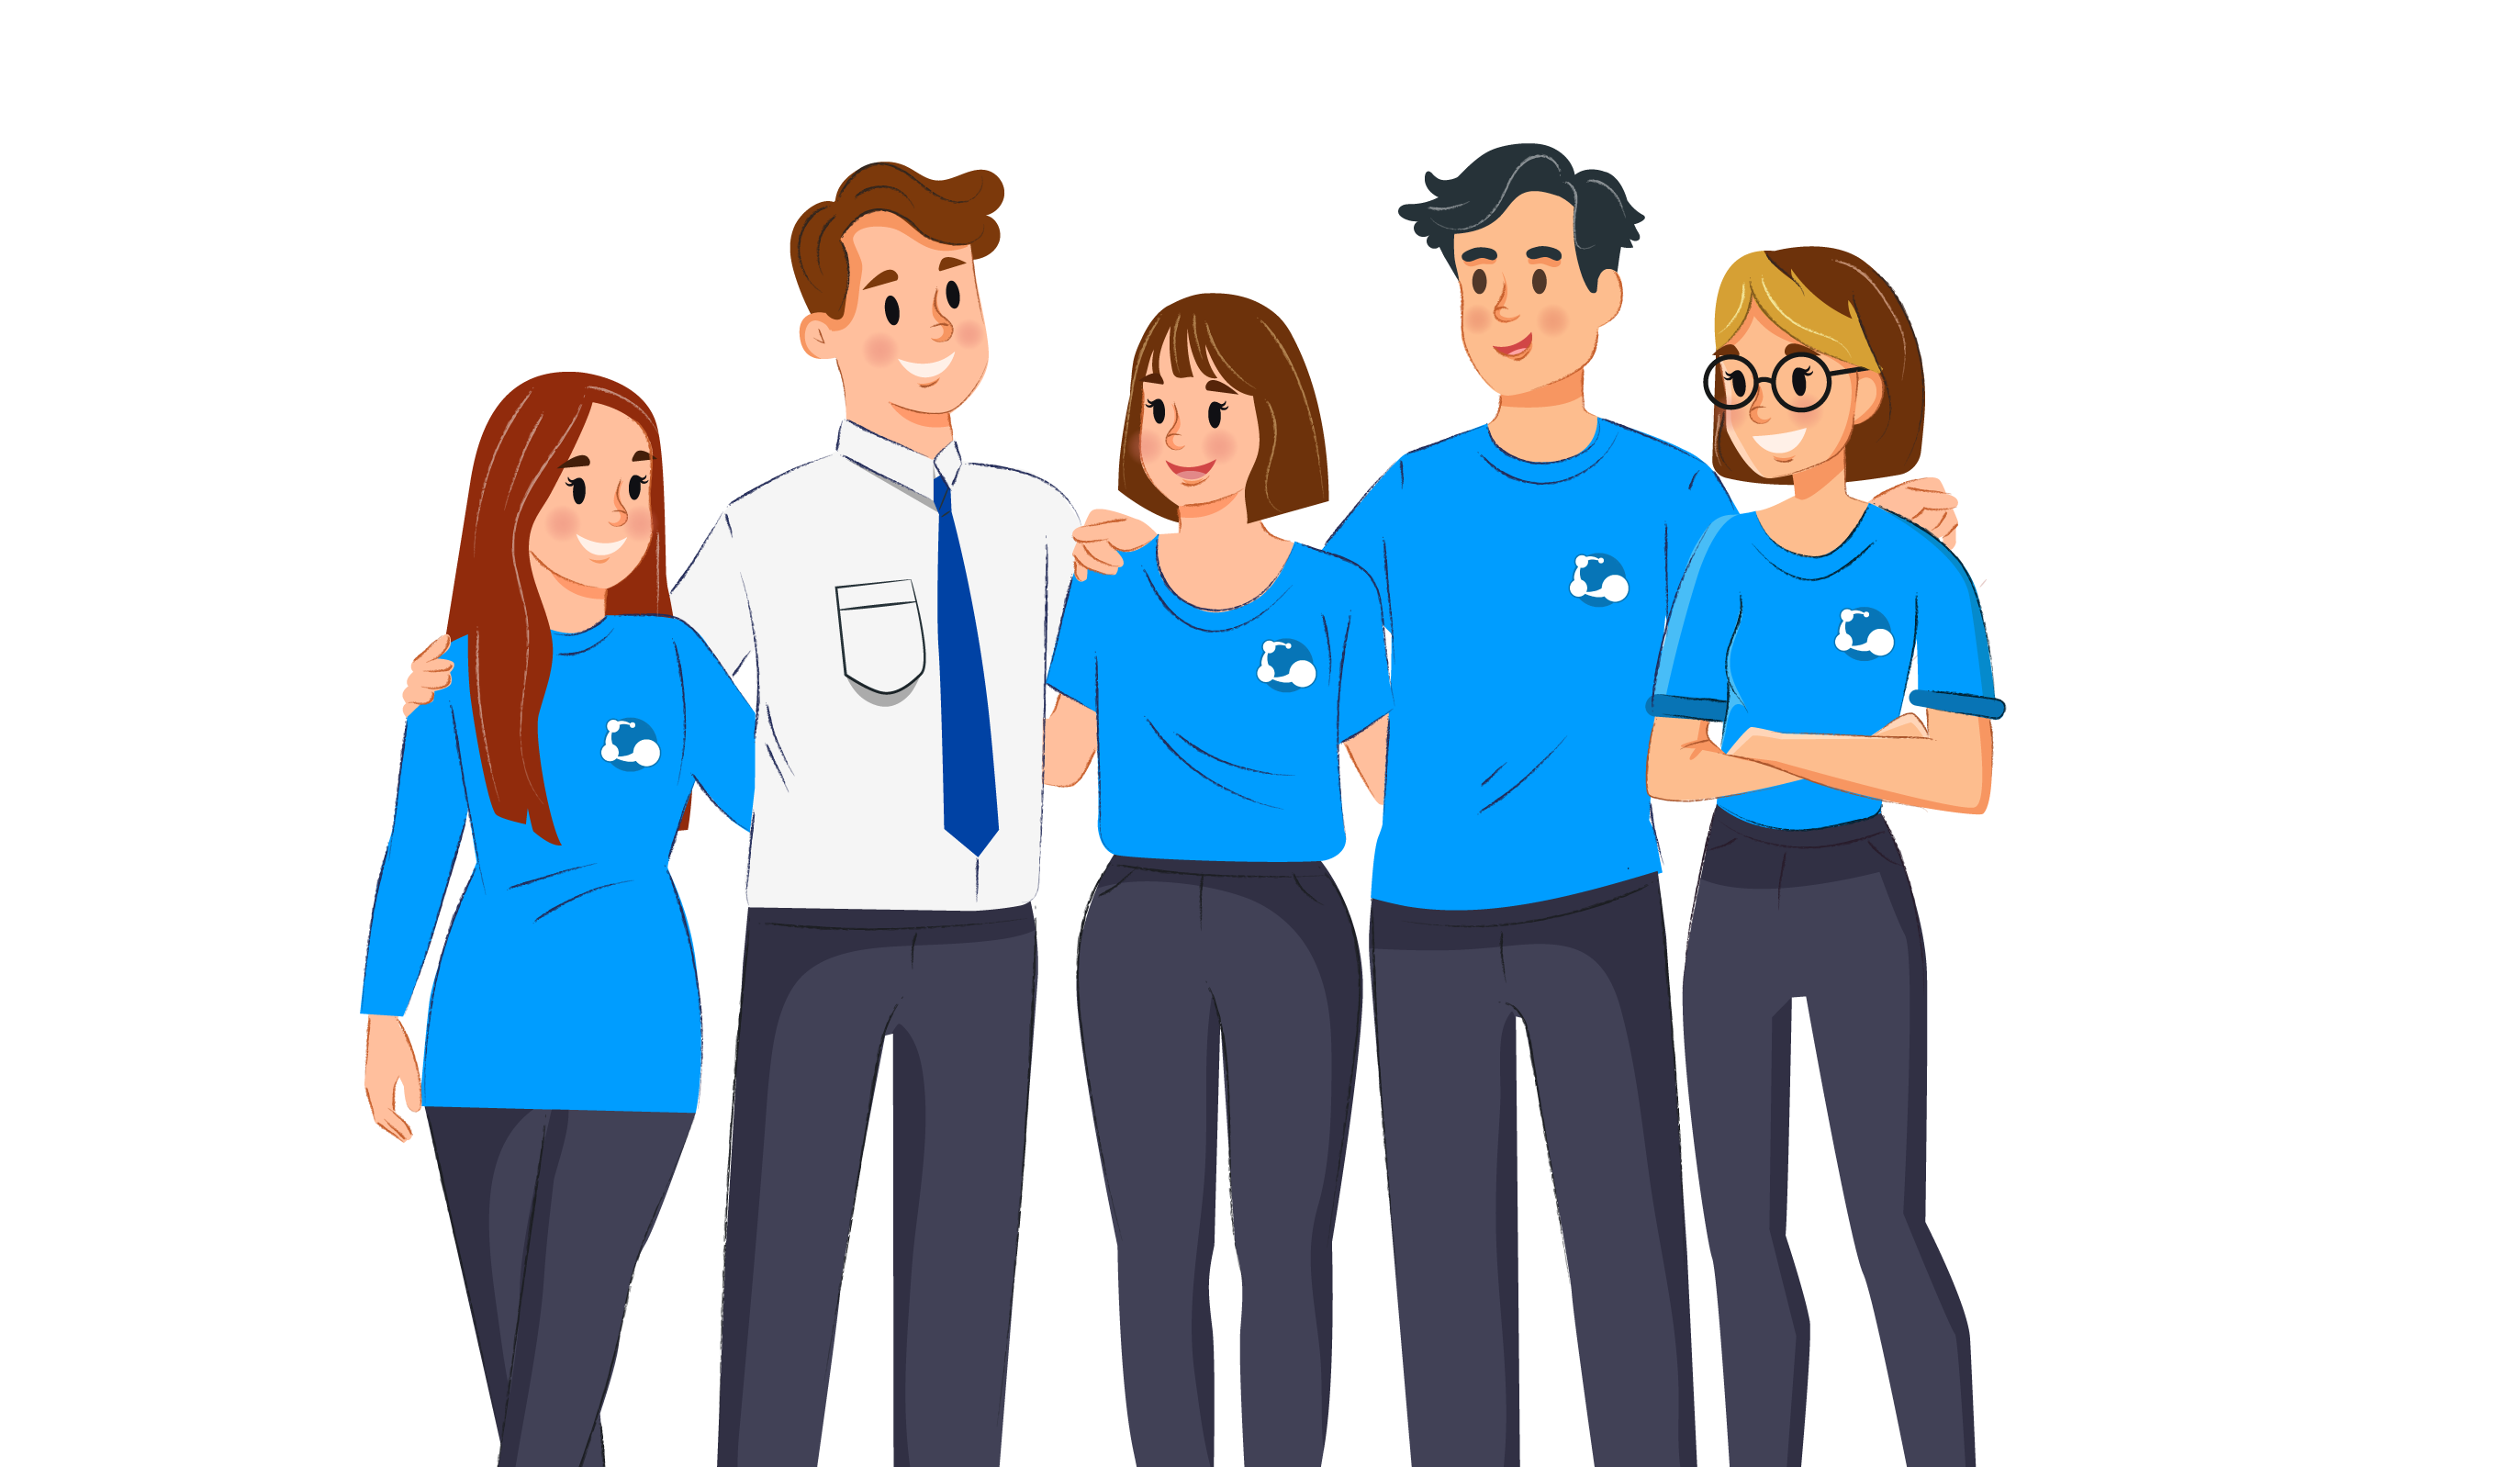 The Australis Localization team is shown all hugging at shoulder height; the team is composed of three women in blue shirts with the Australis logo, a man in a blue shirt, and a manager in a formal white shirt and a blue tie.